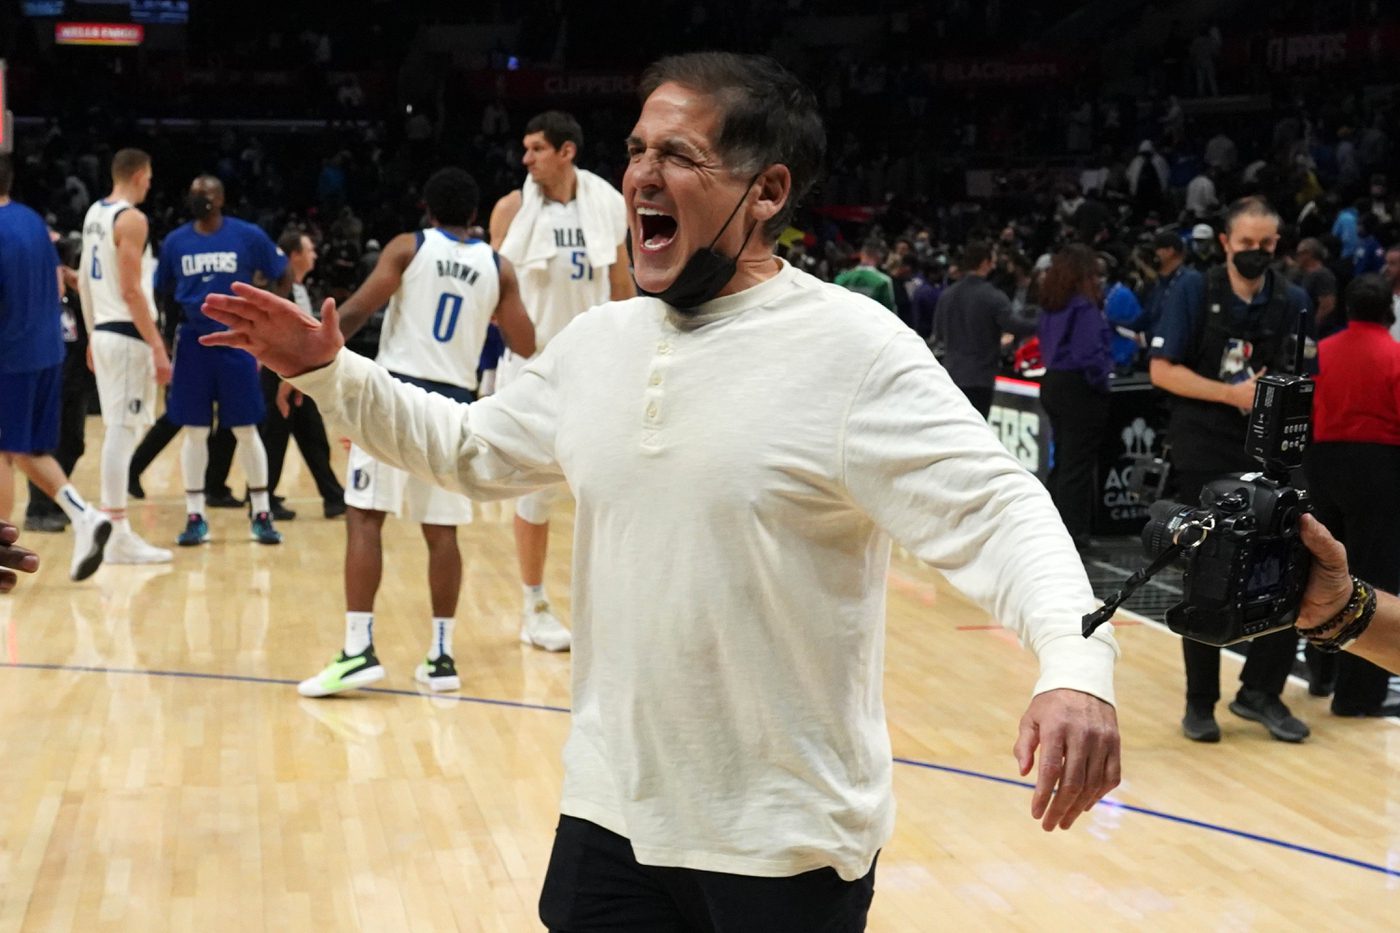 Nov 23, 2021; Los Angeles, California, USA; Dallas Mavericks owner Mark Cuban celebrates at the end of the game against the LA Clippers at Staples Center. The Mavericks defeated the Clippers 112-104 in overtime.Mandatory Credit: Kirby Lee-USA TODAY Sports